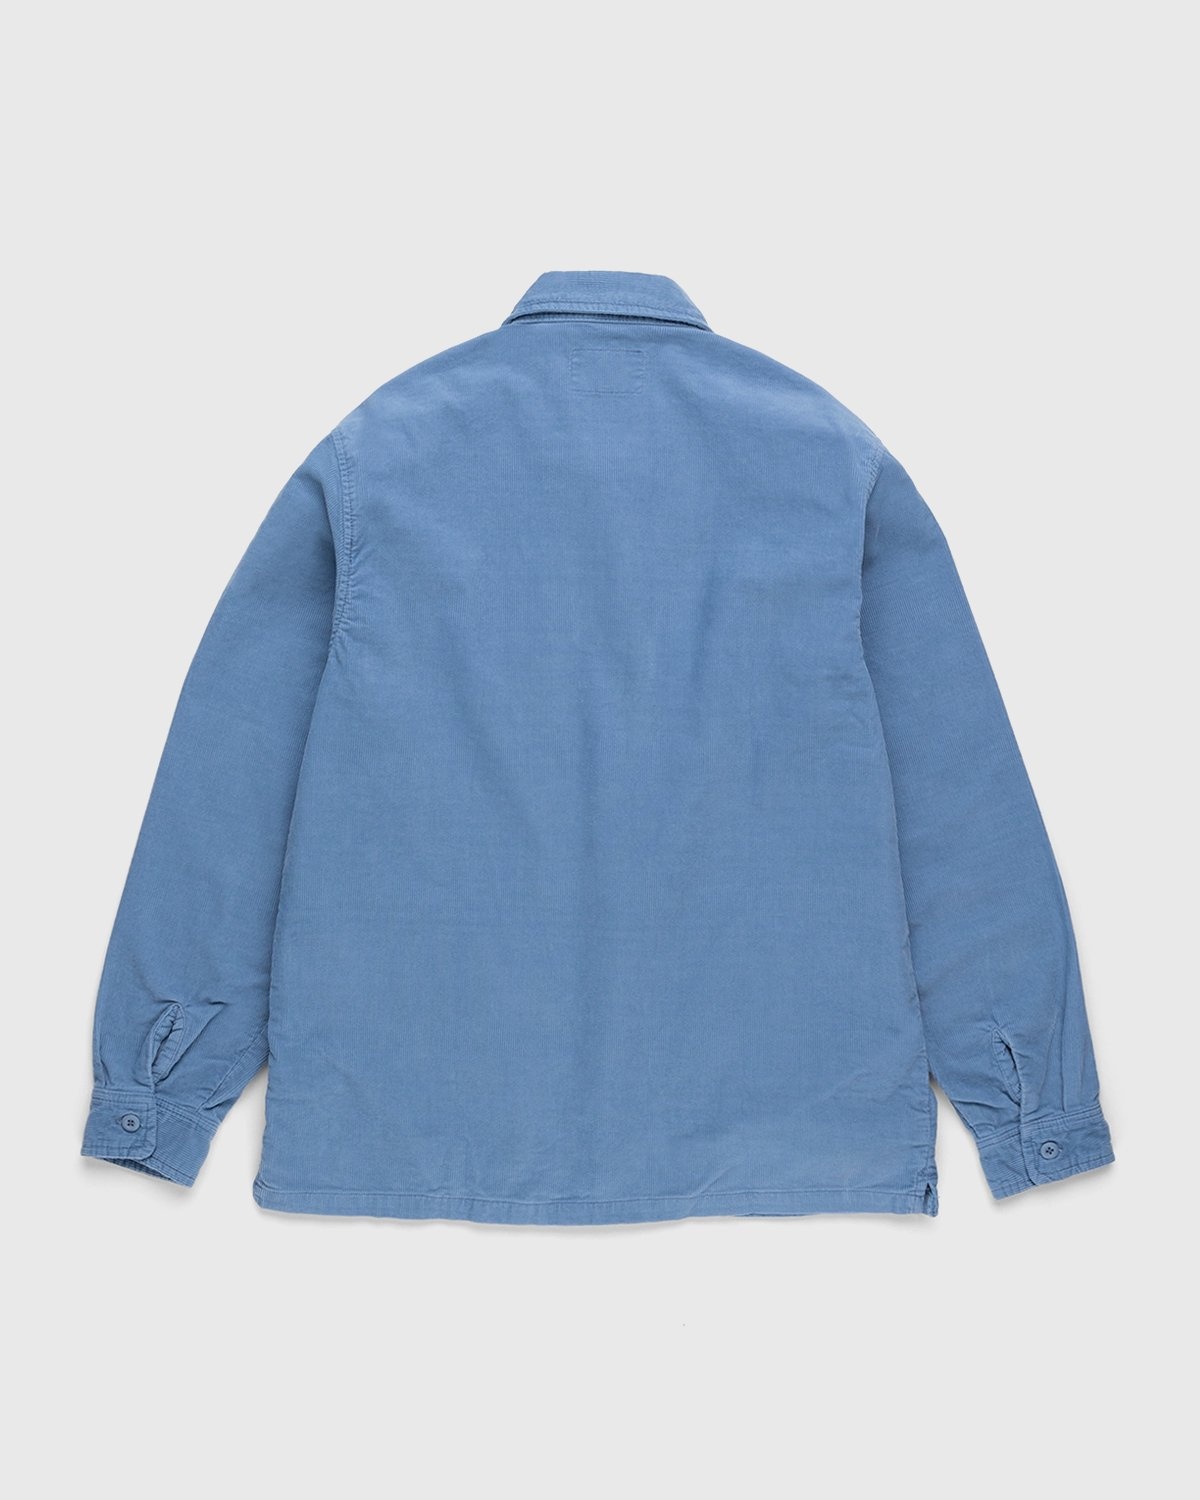 Carhartt WIP – Dixon Shirt Jacket Icy Water Rinsed - Outerwear - Blue - Image 2